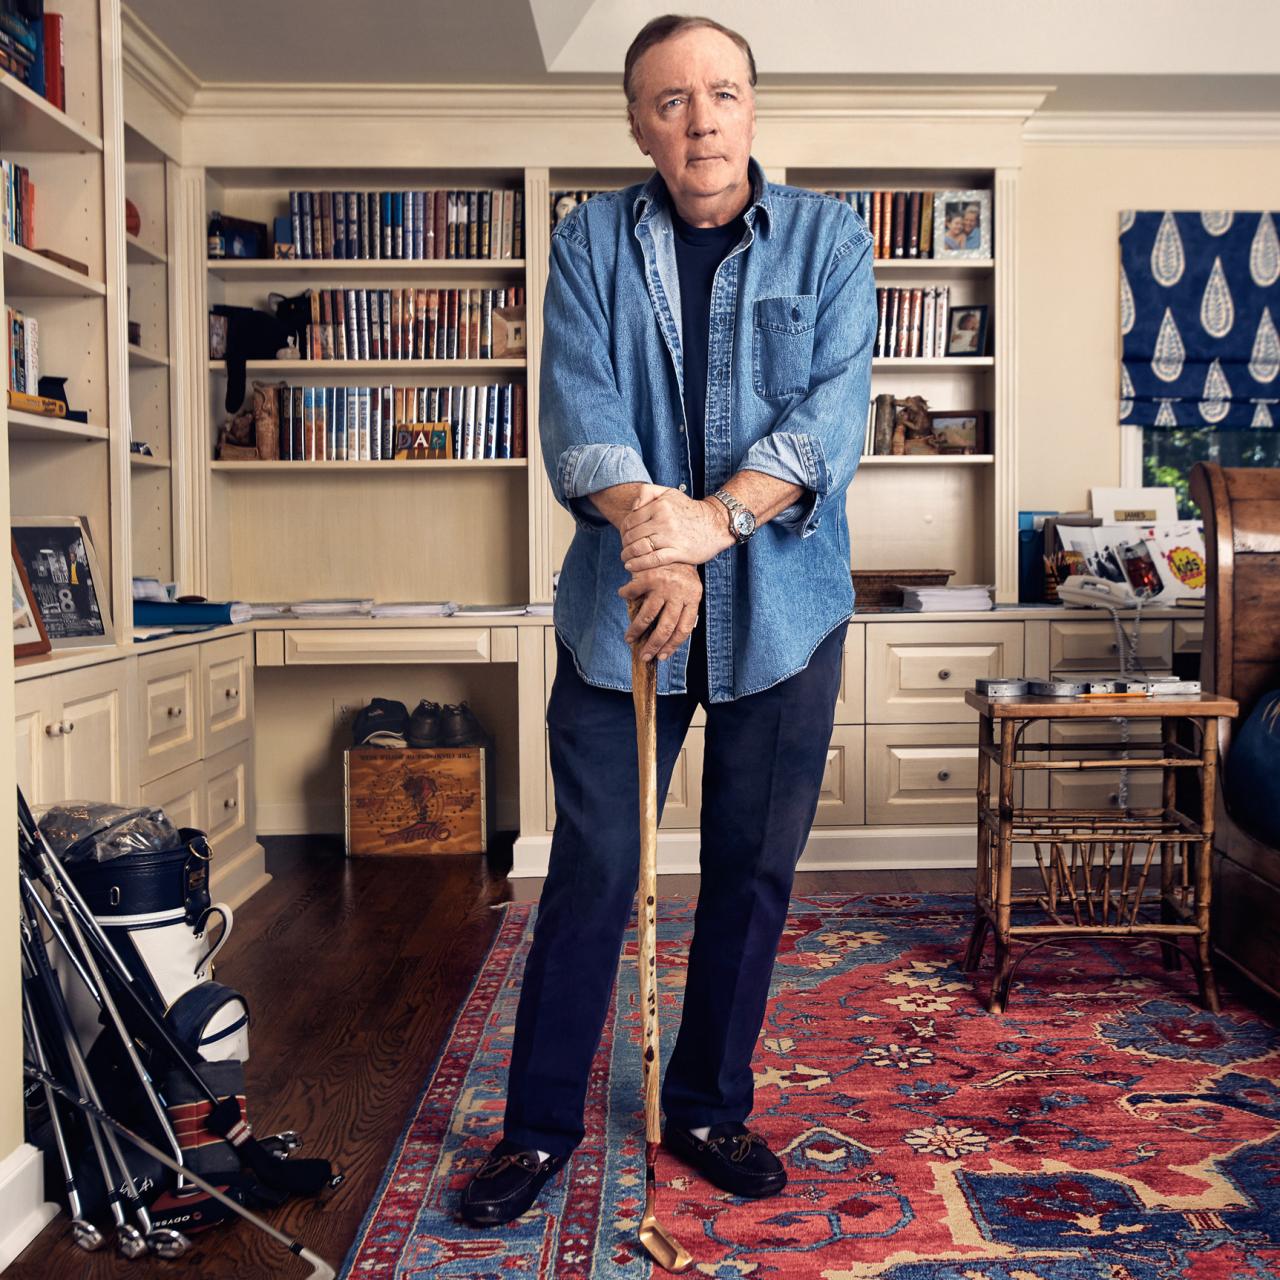 How James Patterson Became the Ultimate Storyteller